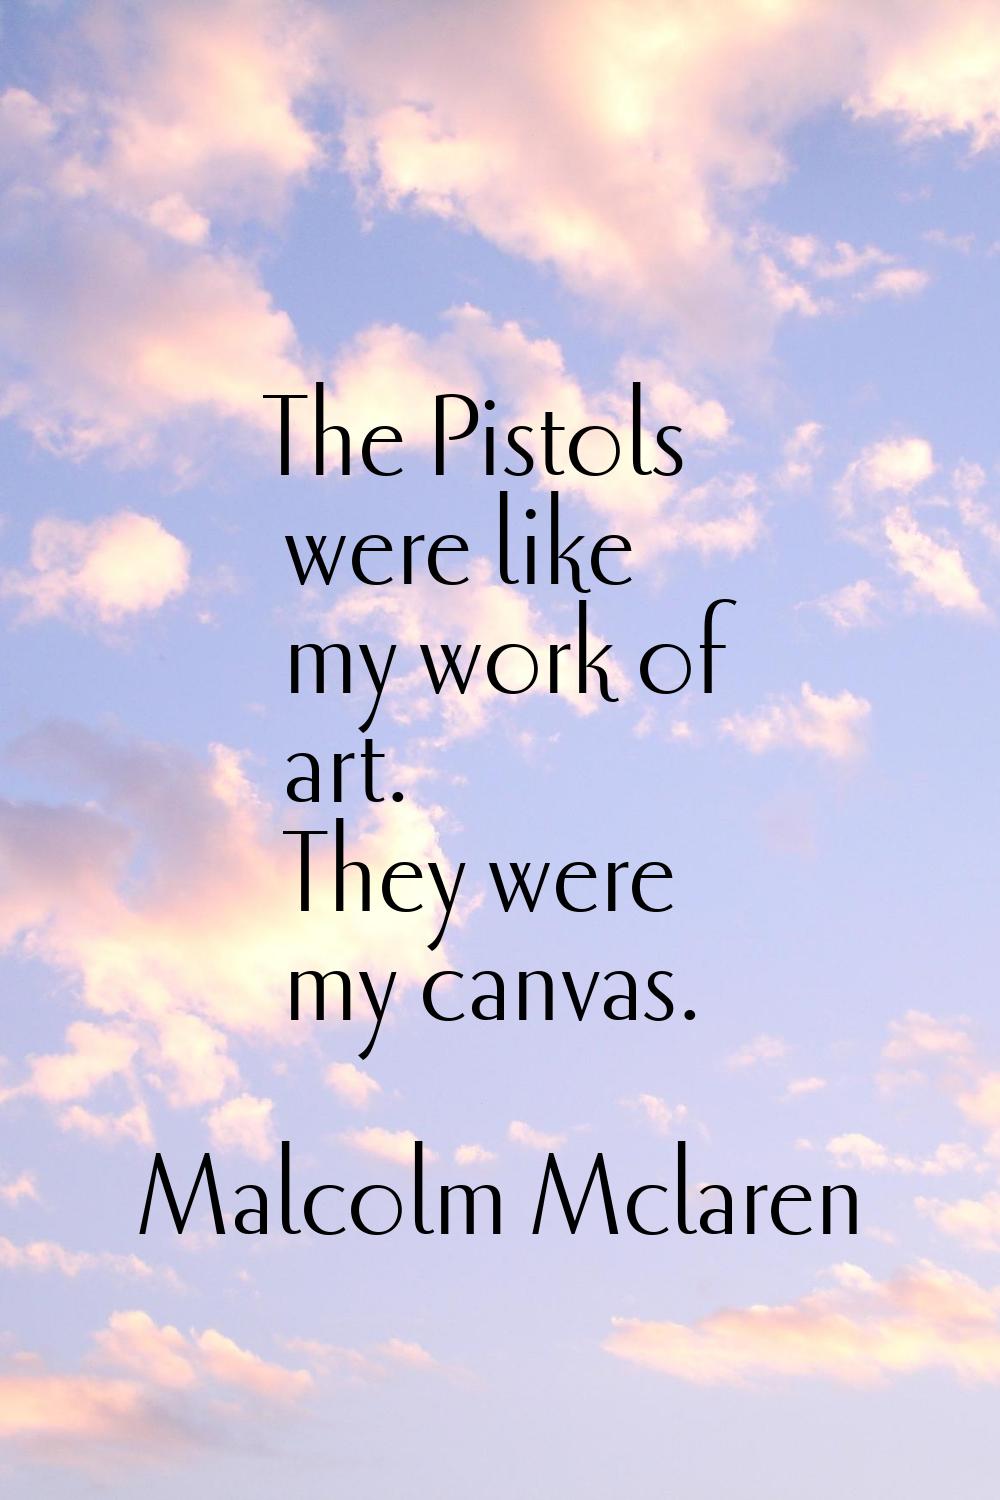 The Pistols were like my work of art. They were my canvas.